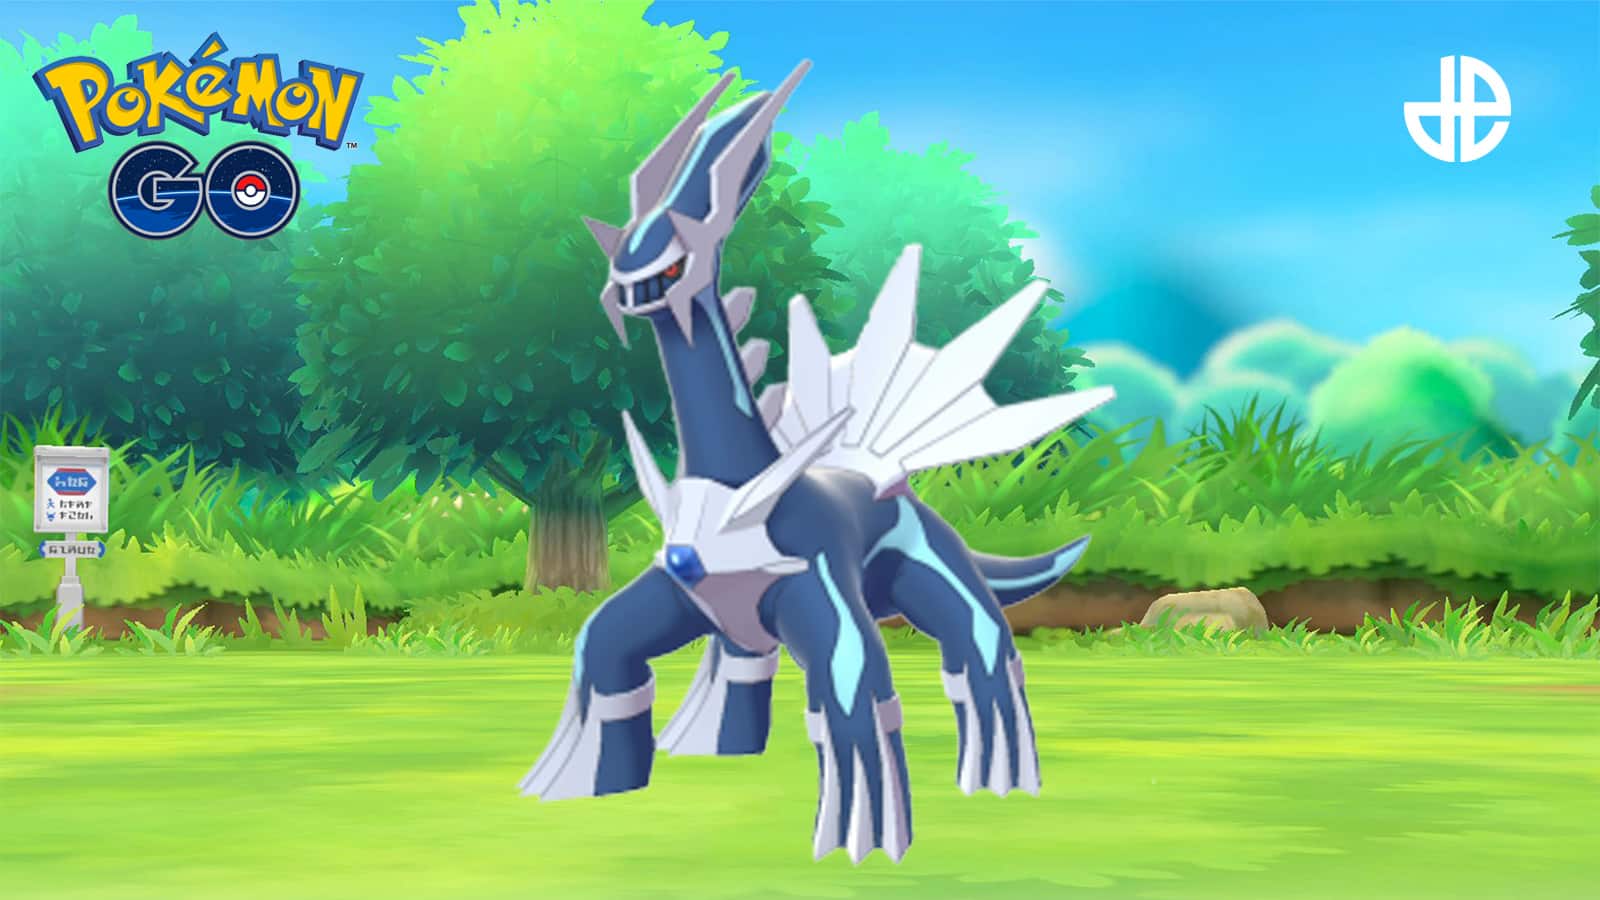 Pokémon Go Dialga best moveset and counters guide - Polygon